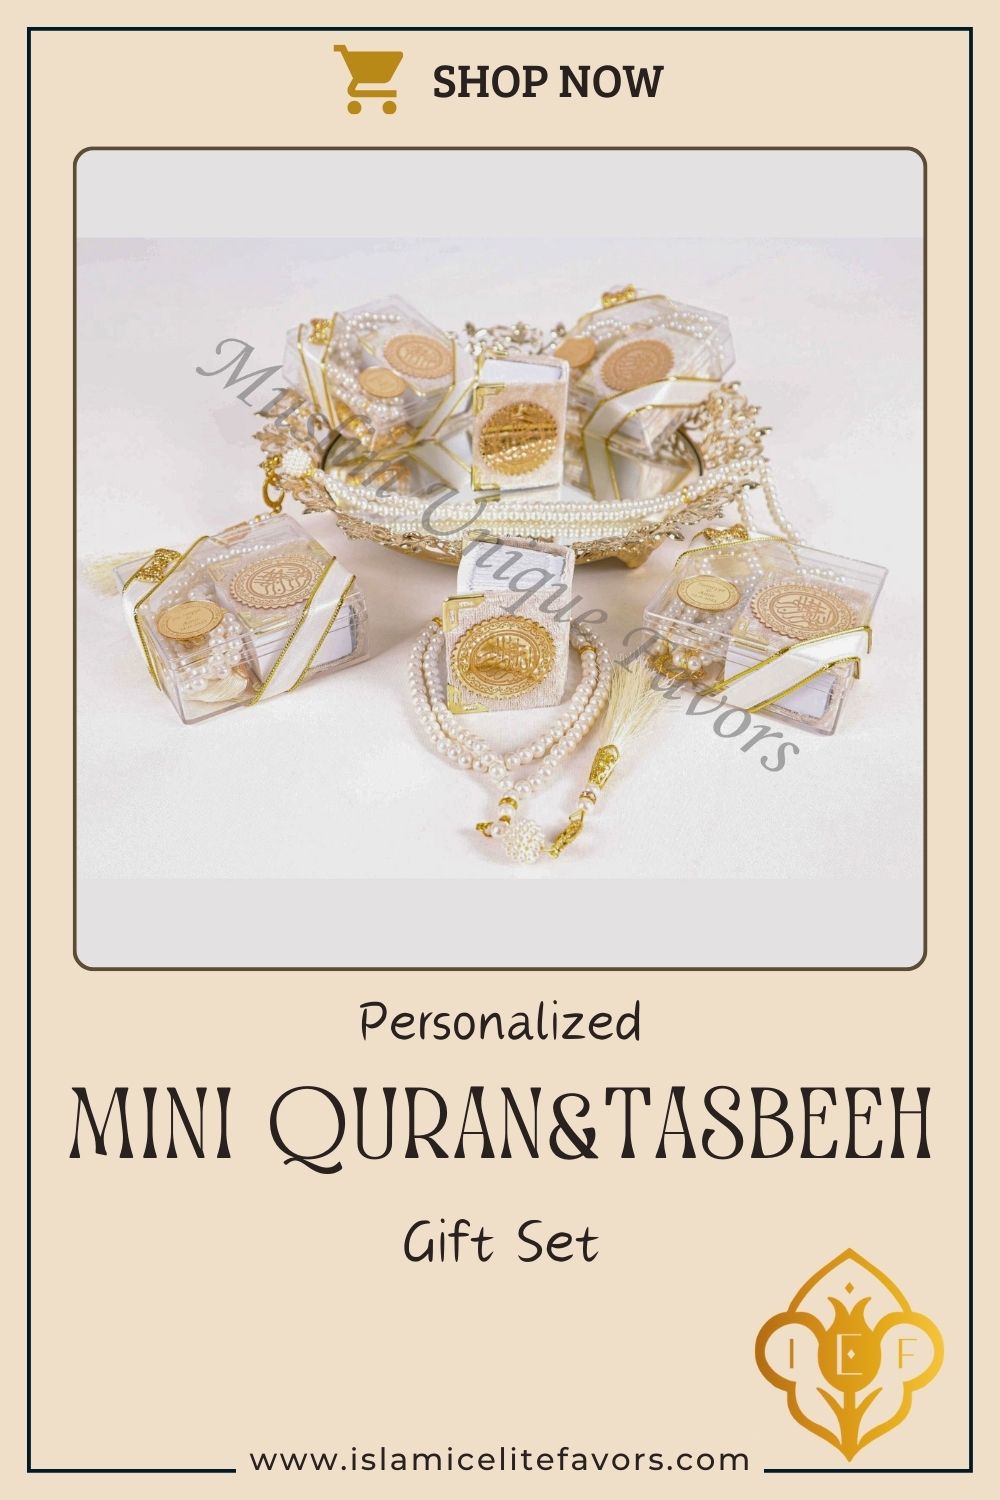 Personalized Mini Quran Pearl Prayer Bead Bow Tie Décor Wedding Favor - Islamic Elite Favors is a handmade gift shop offering a wide variety of unique and personalized gifts for all occasions. Whether you're looking for the perfect Ramadan, Eid, Hajj, wedding gift or something special for a birthday, baby shower or anniversary, we have something for everyone. High quality, made with love.